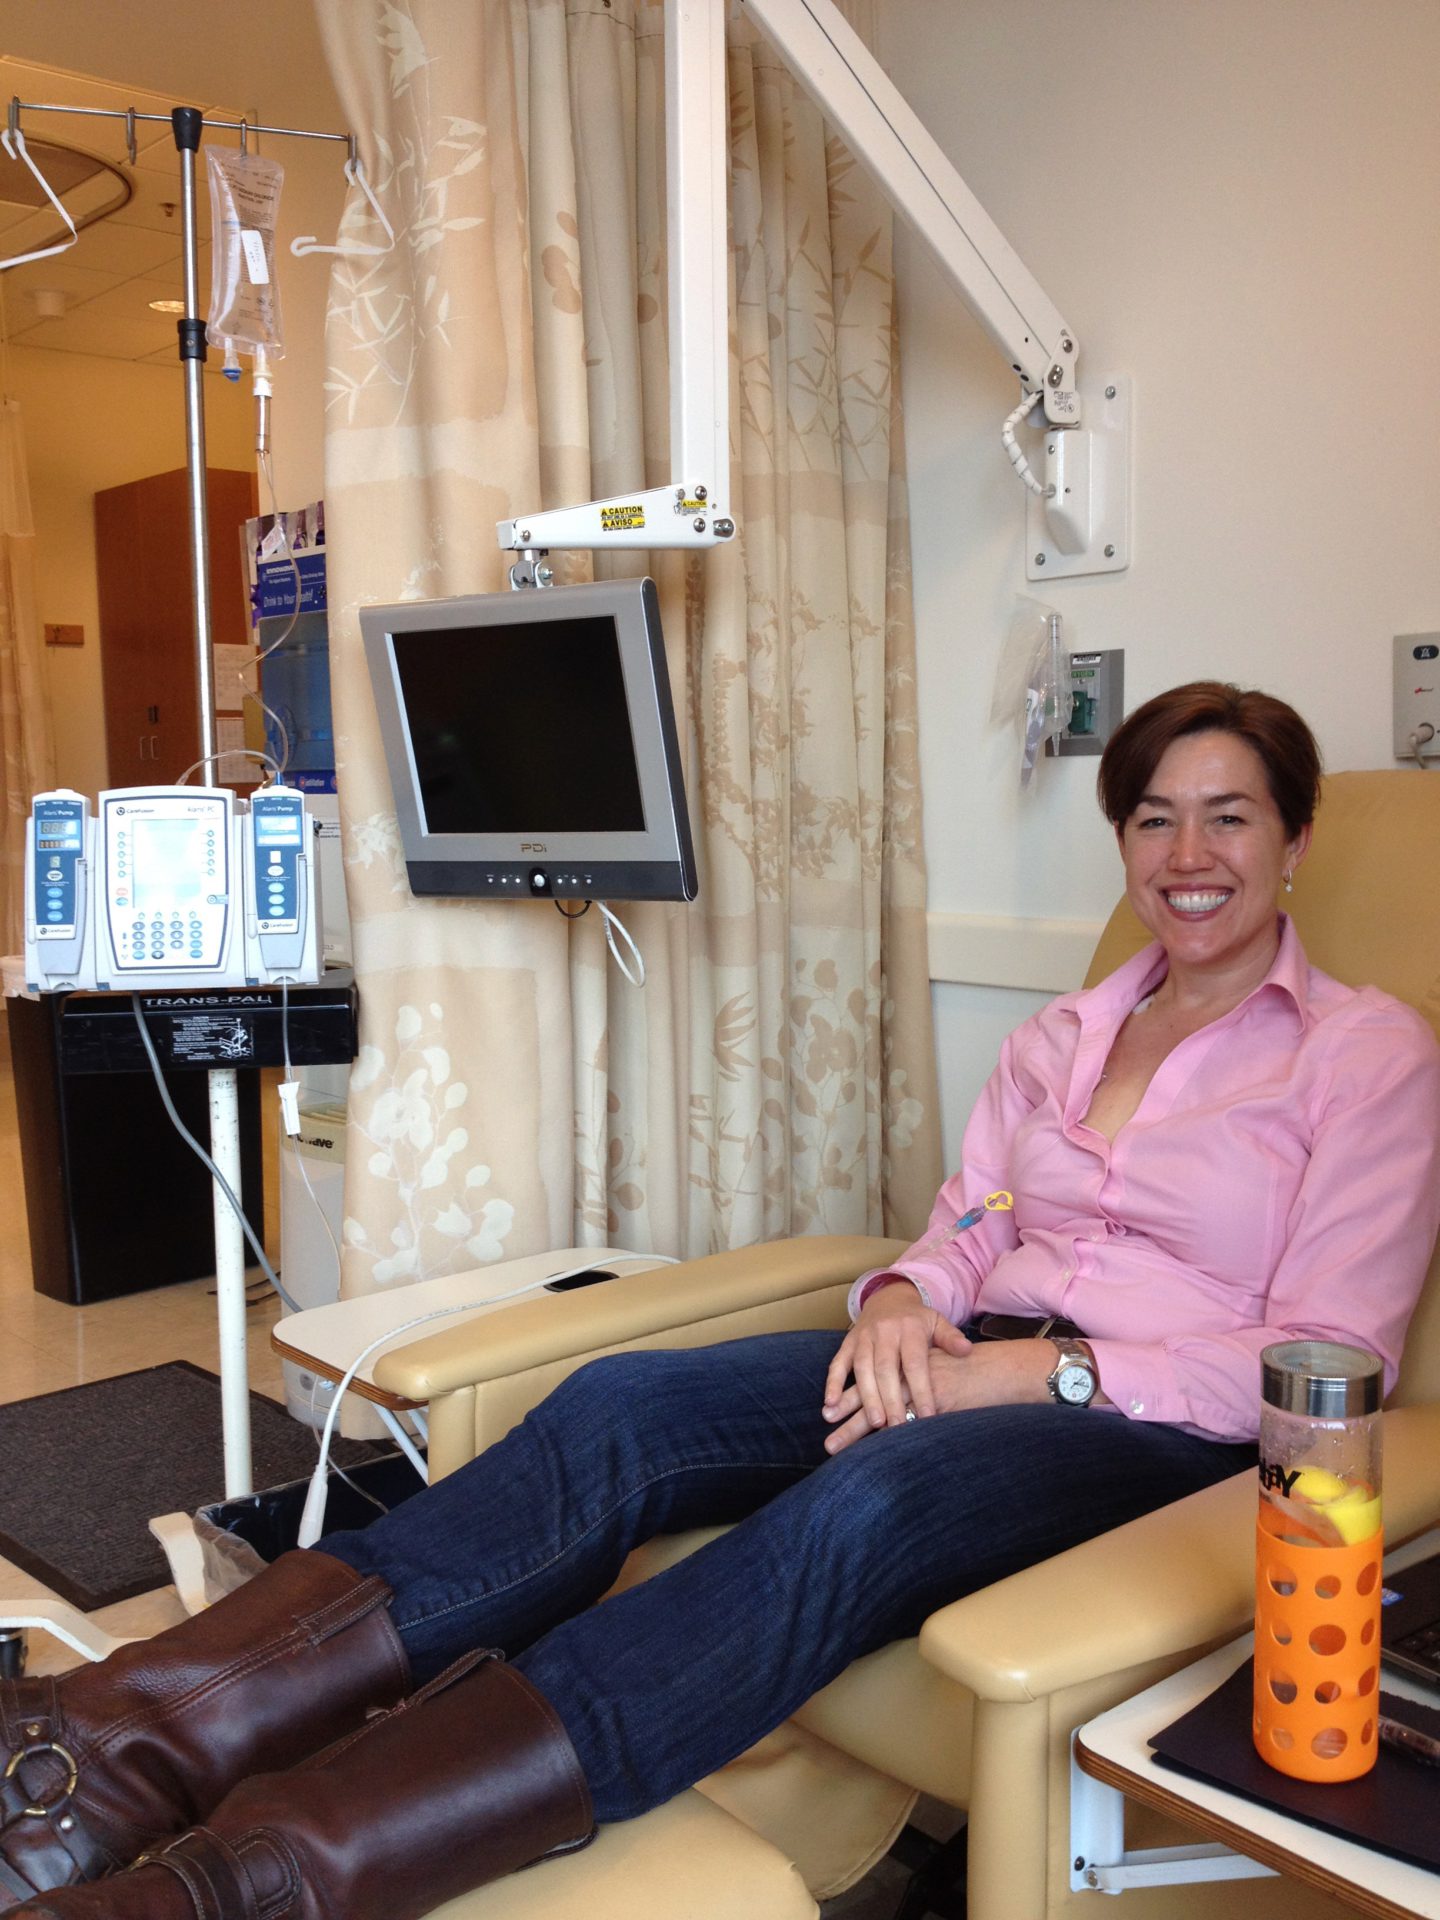 Sarah received chemo for her cancer treatments